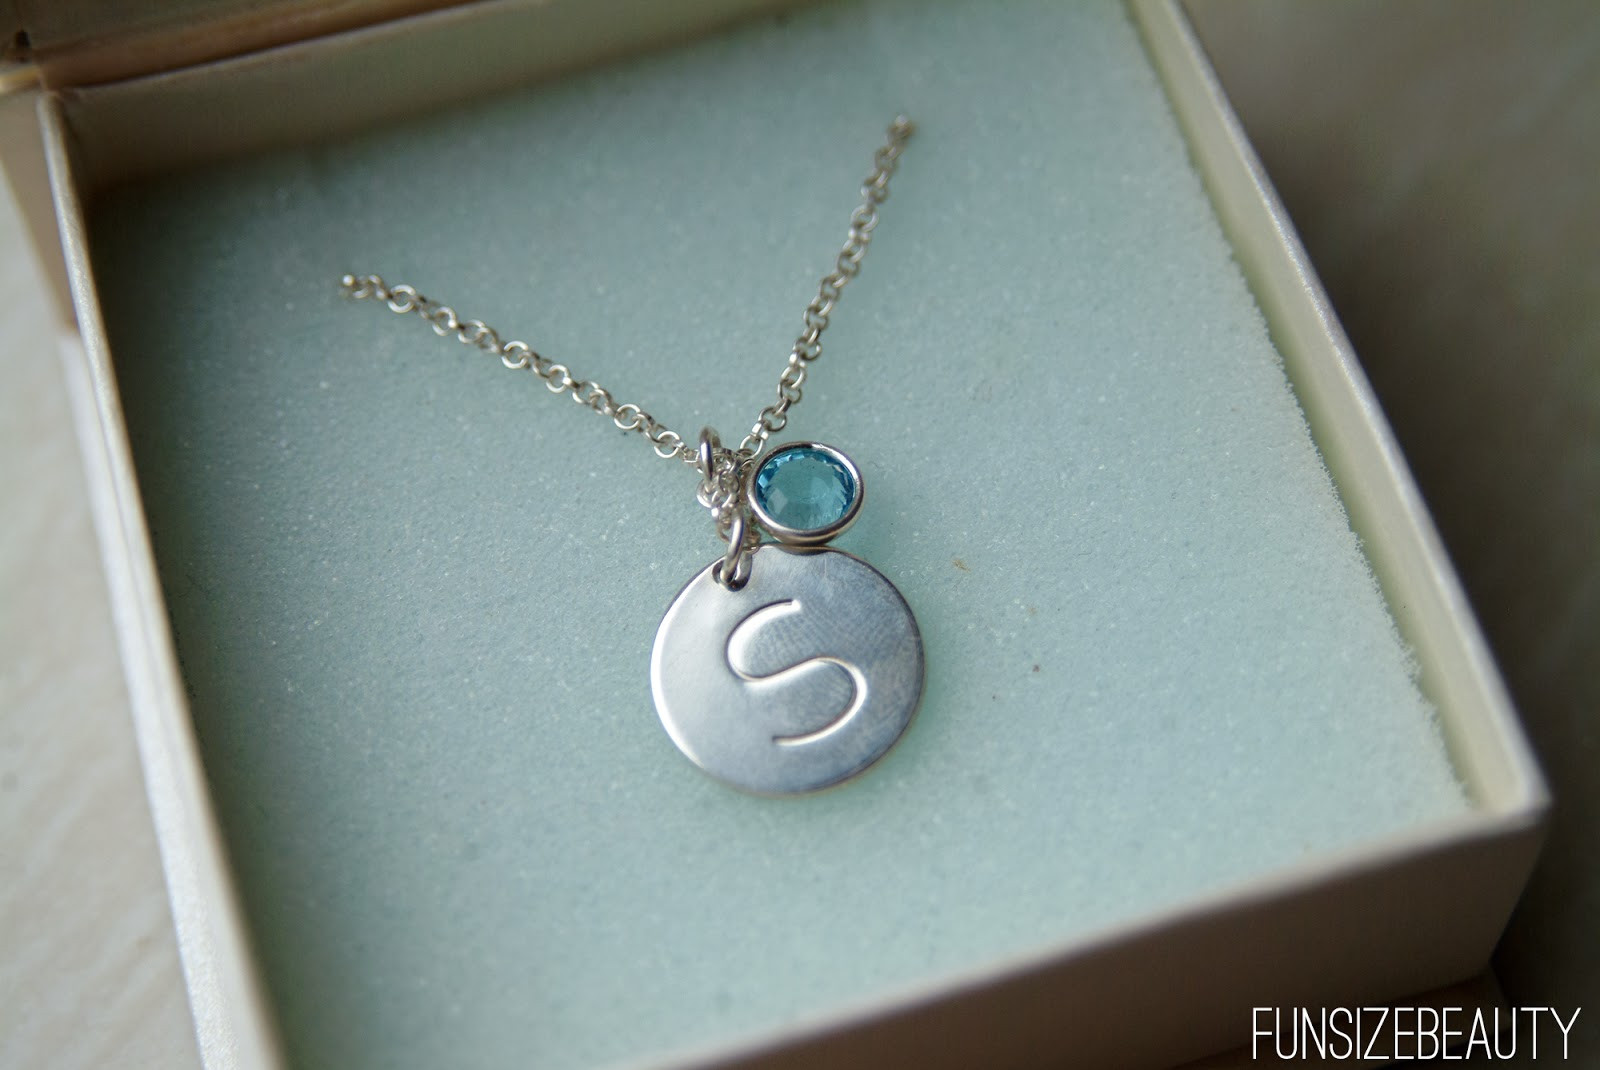 My Name Necklace Reviews
 fun size beauty My Name Necklace Canada Review